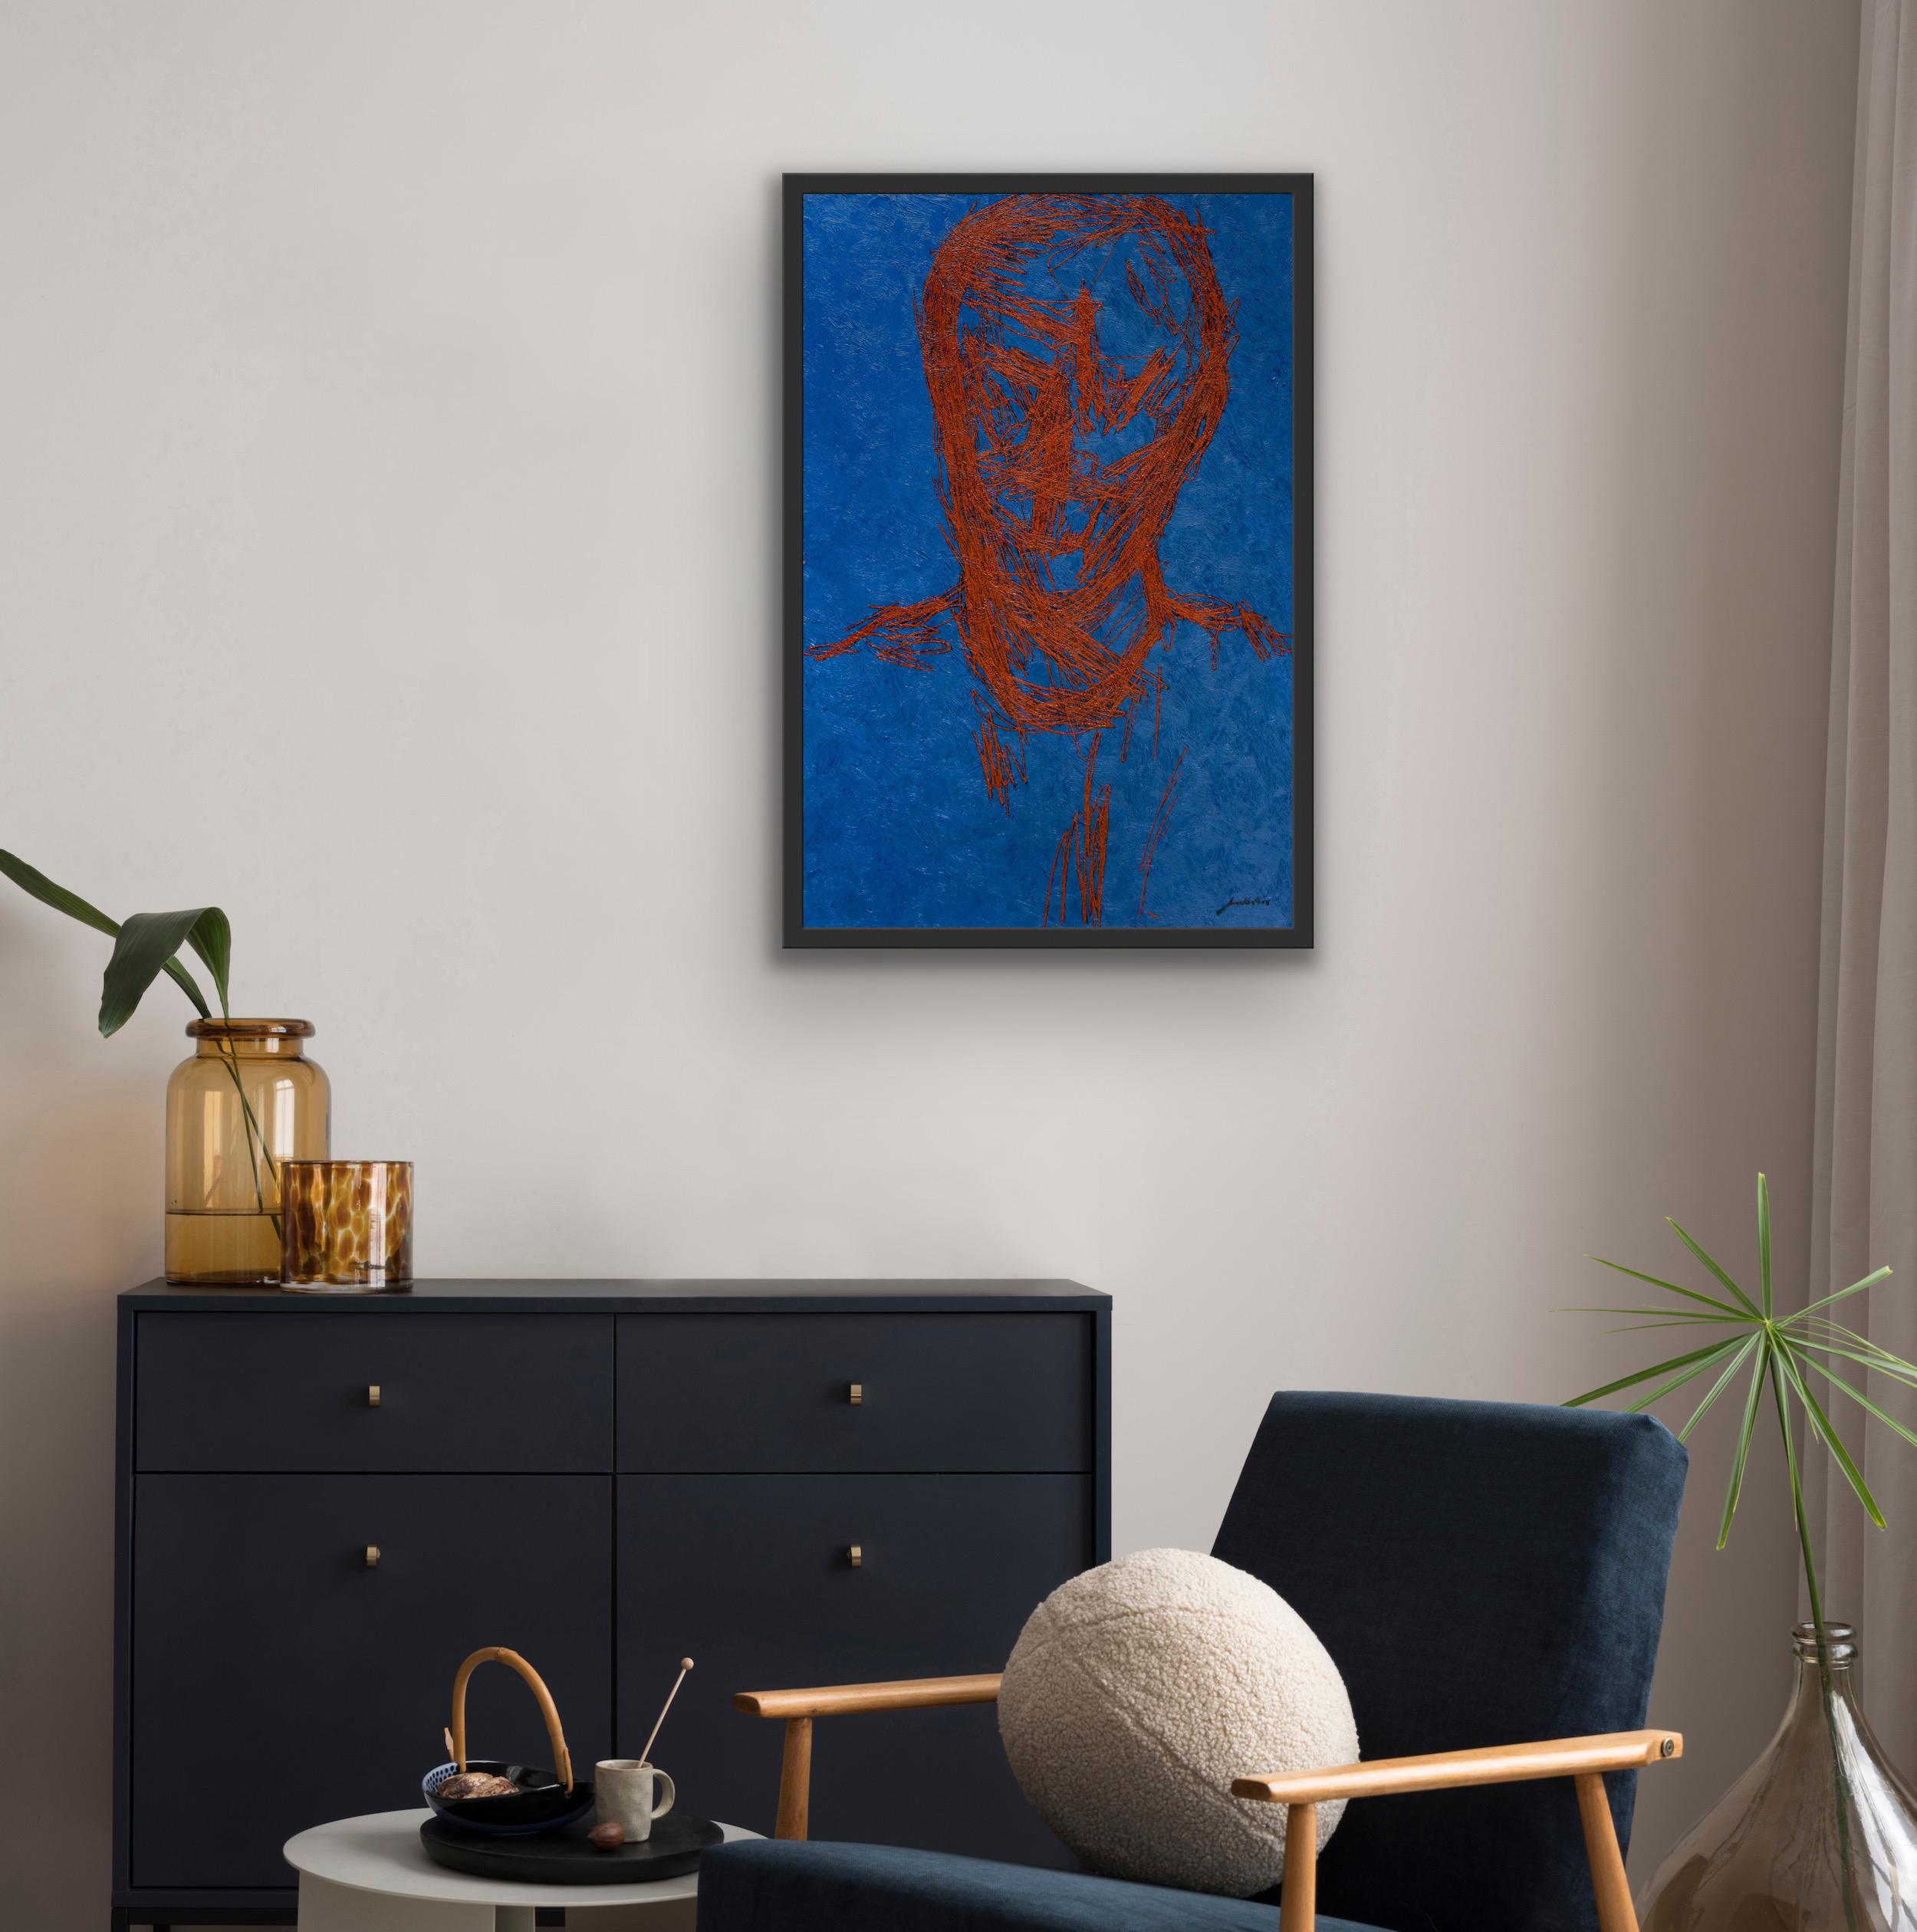 Belorussian Contemporary Art by Ihar Barkhatkou - Portrait in Blue and Red For Sale 12